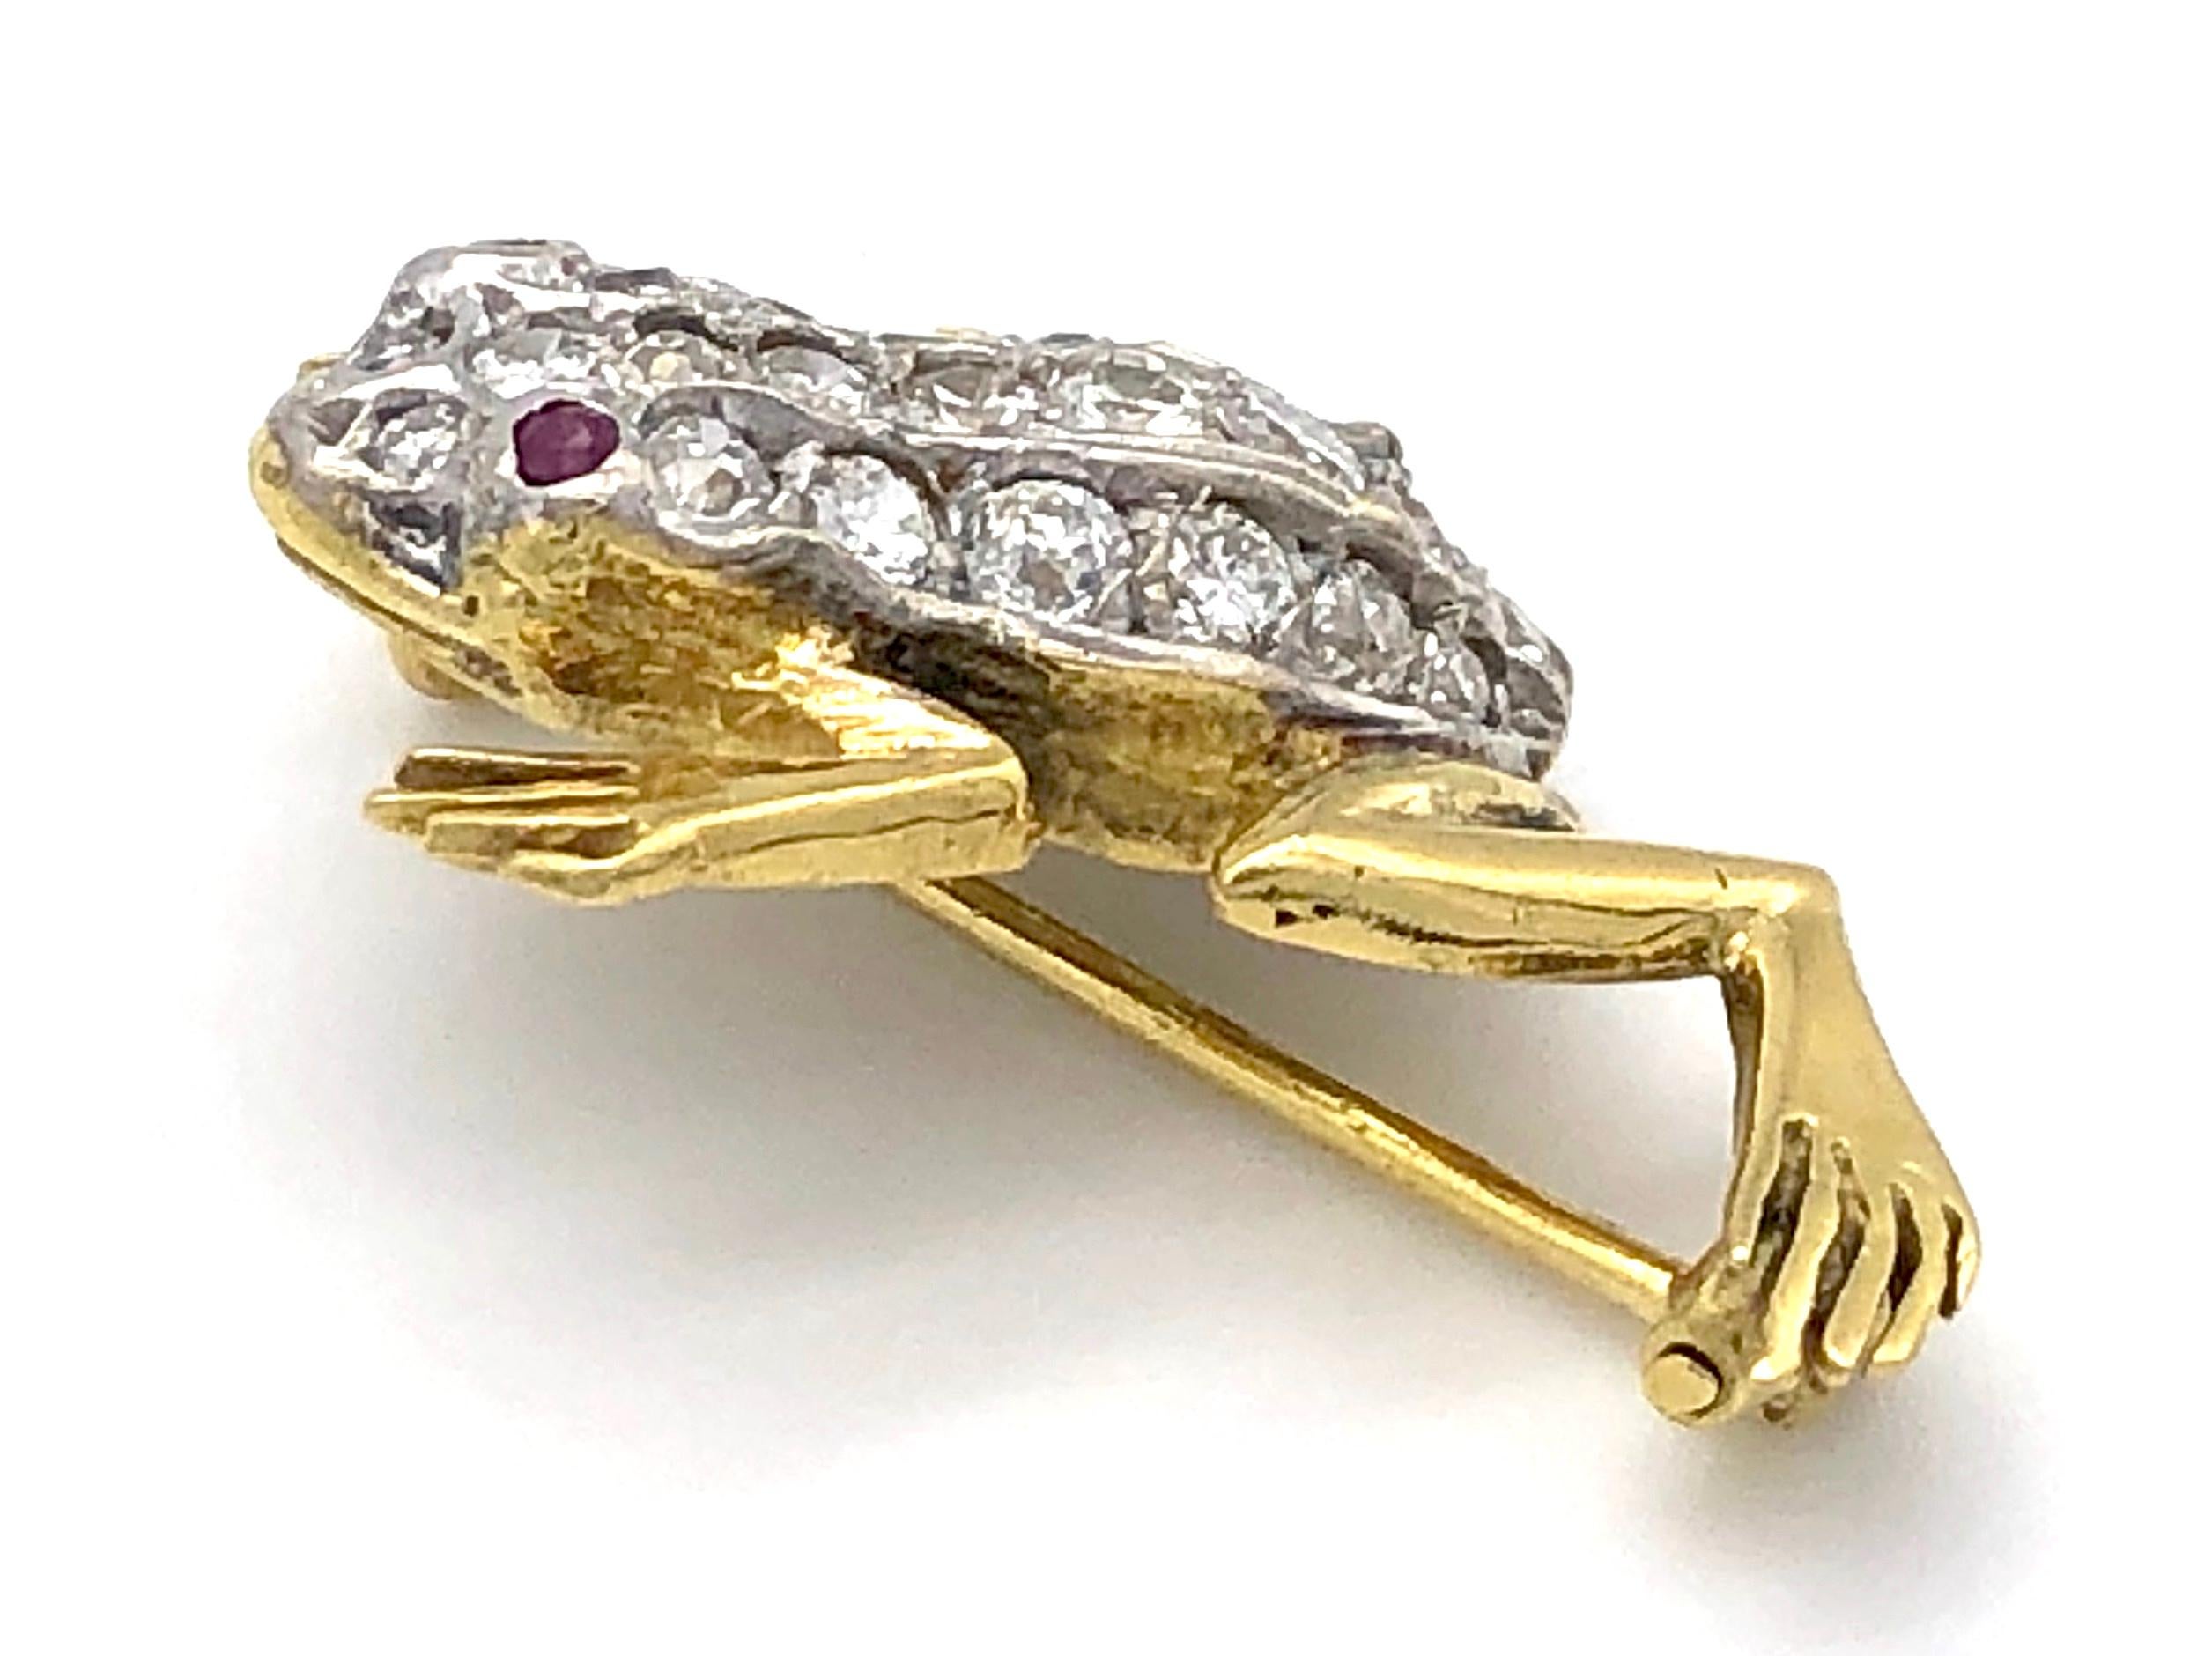 This cute little Brooch in the shape of a frog I set with diamonds. Two little rubies serve as eyes,